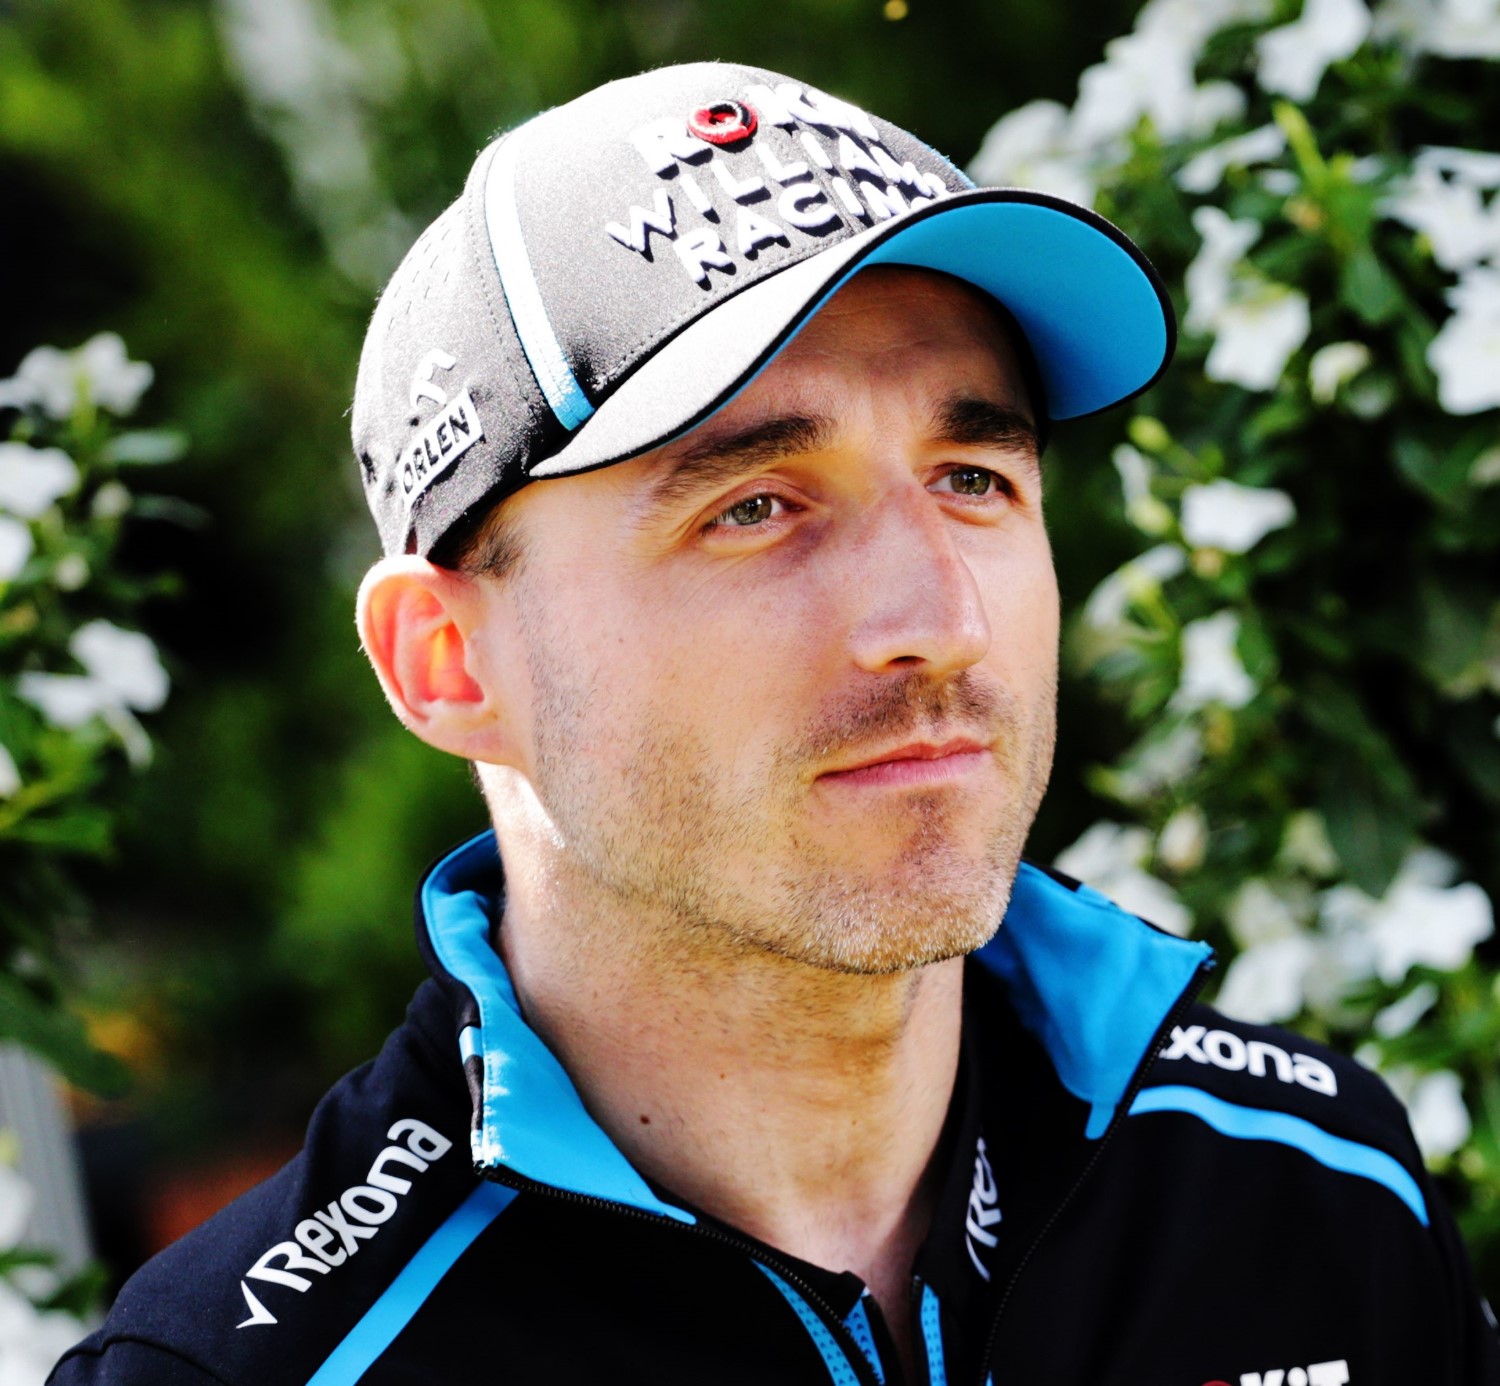 If Kubica's check is large enough, any number of teams will want him despite his physical limitations